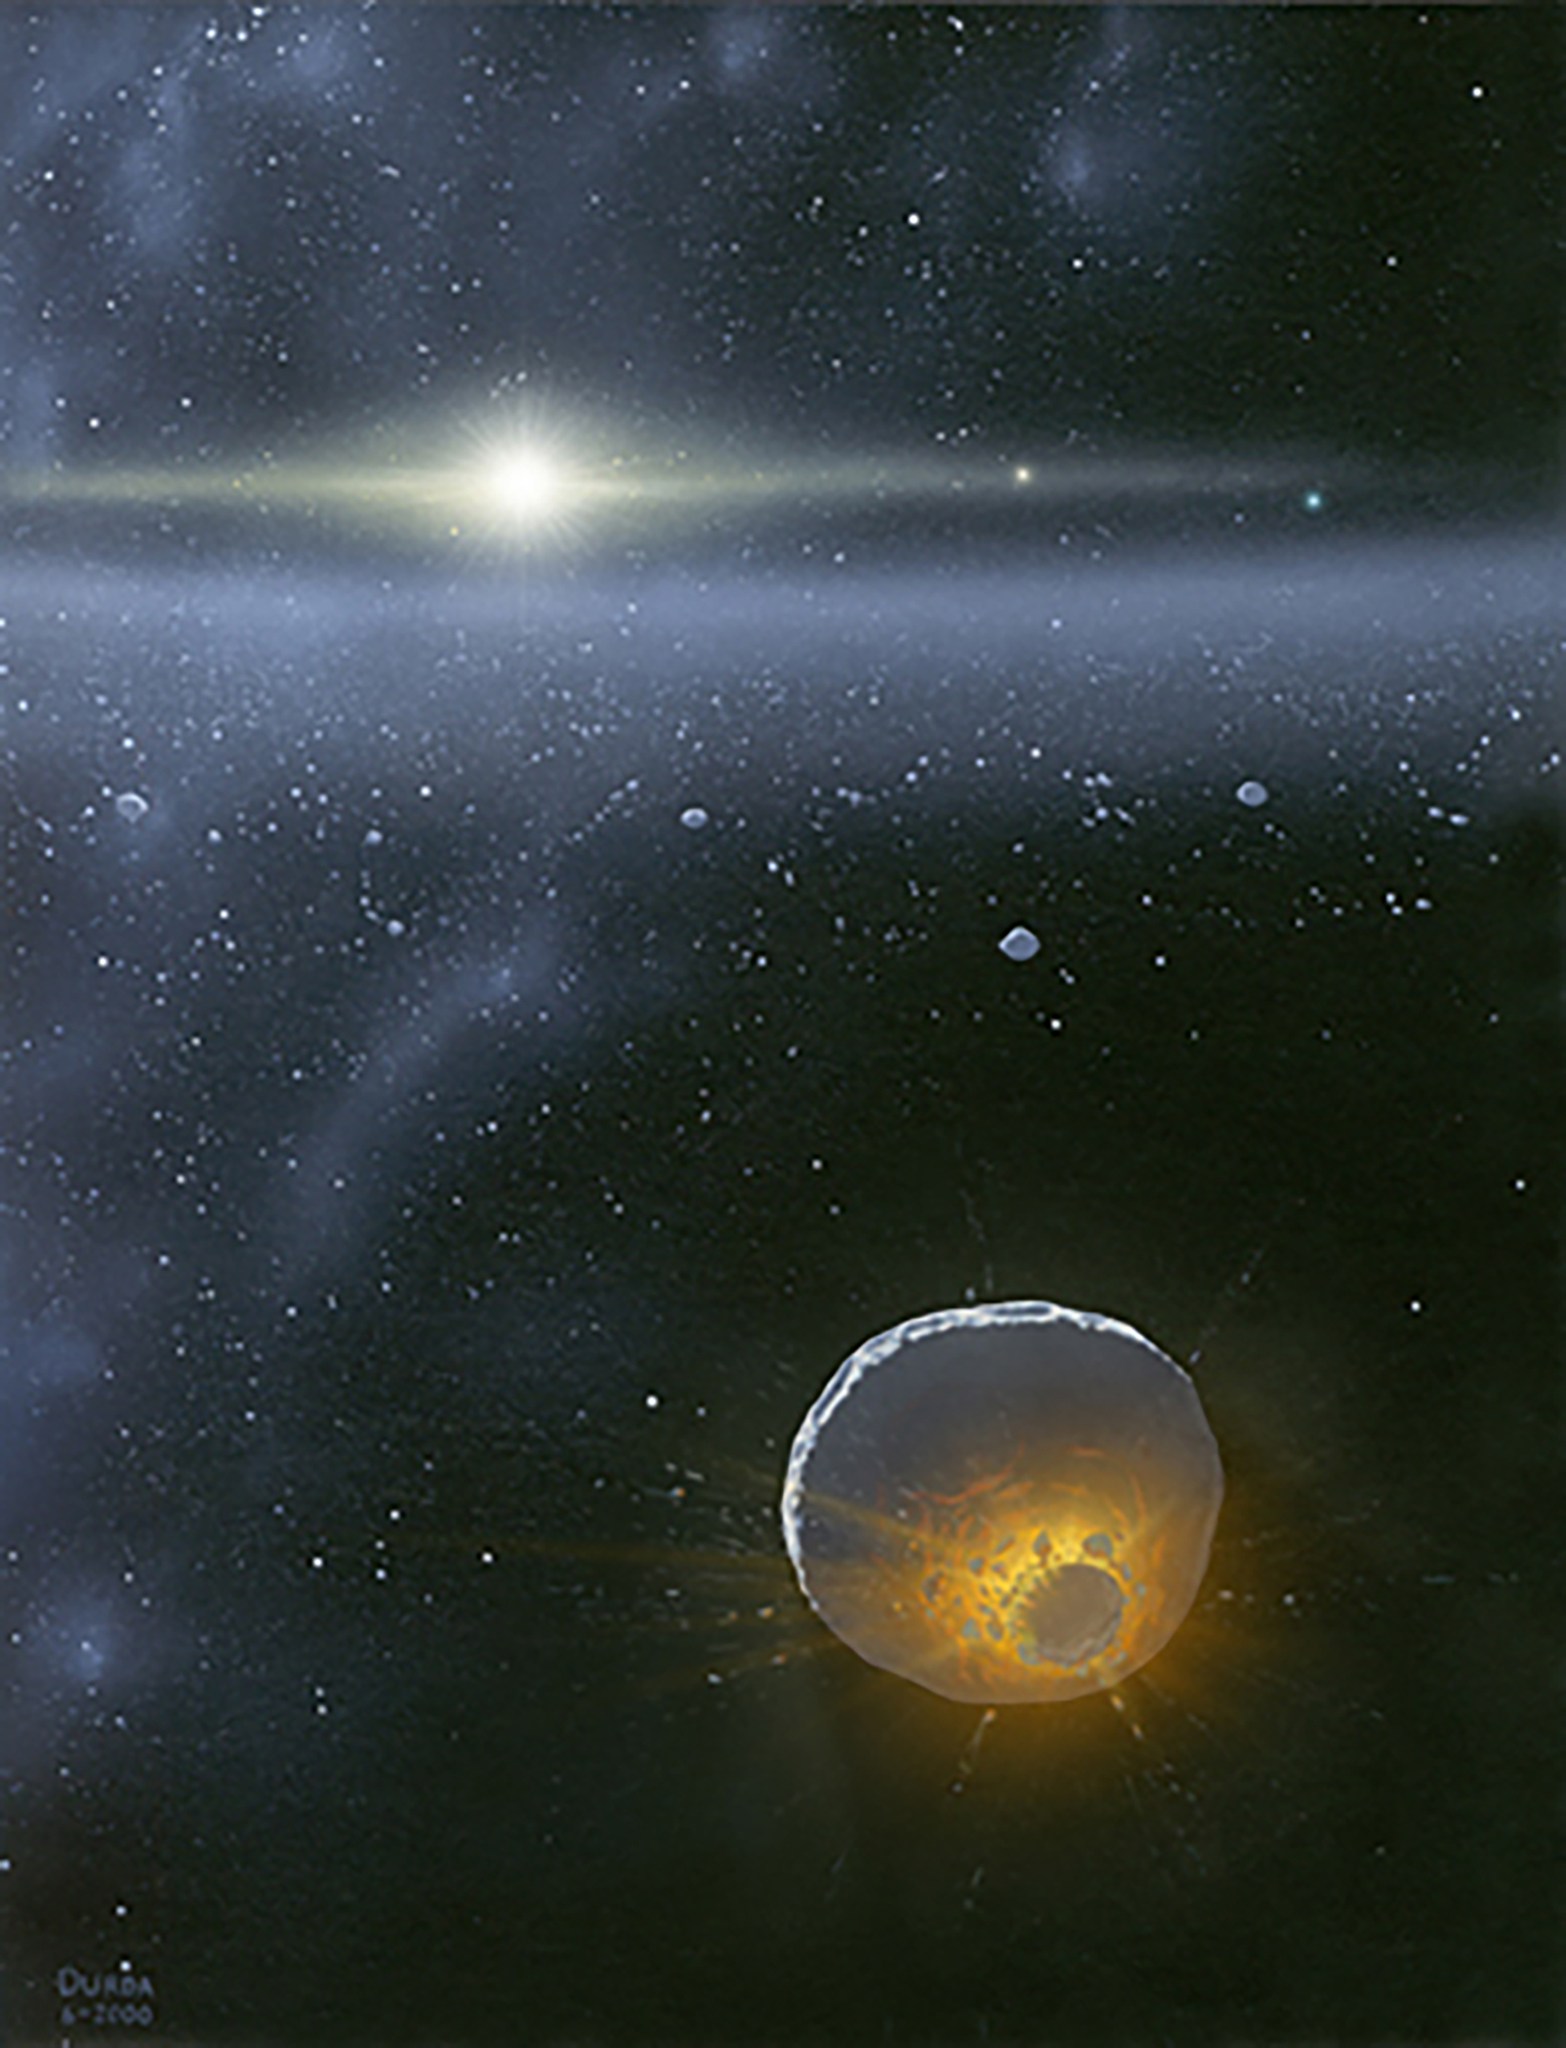 Artist's concept of a collision between two objects in the distant Kuiper Belt